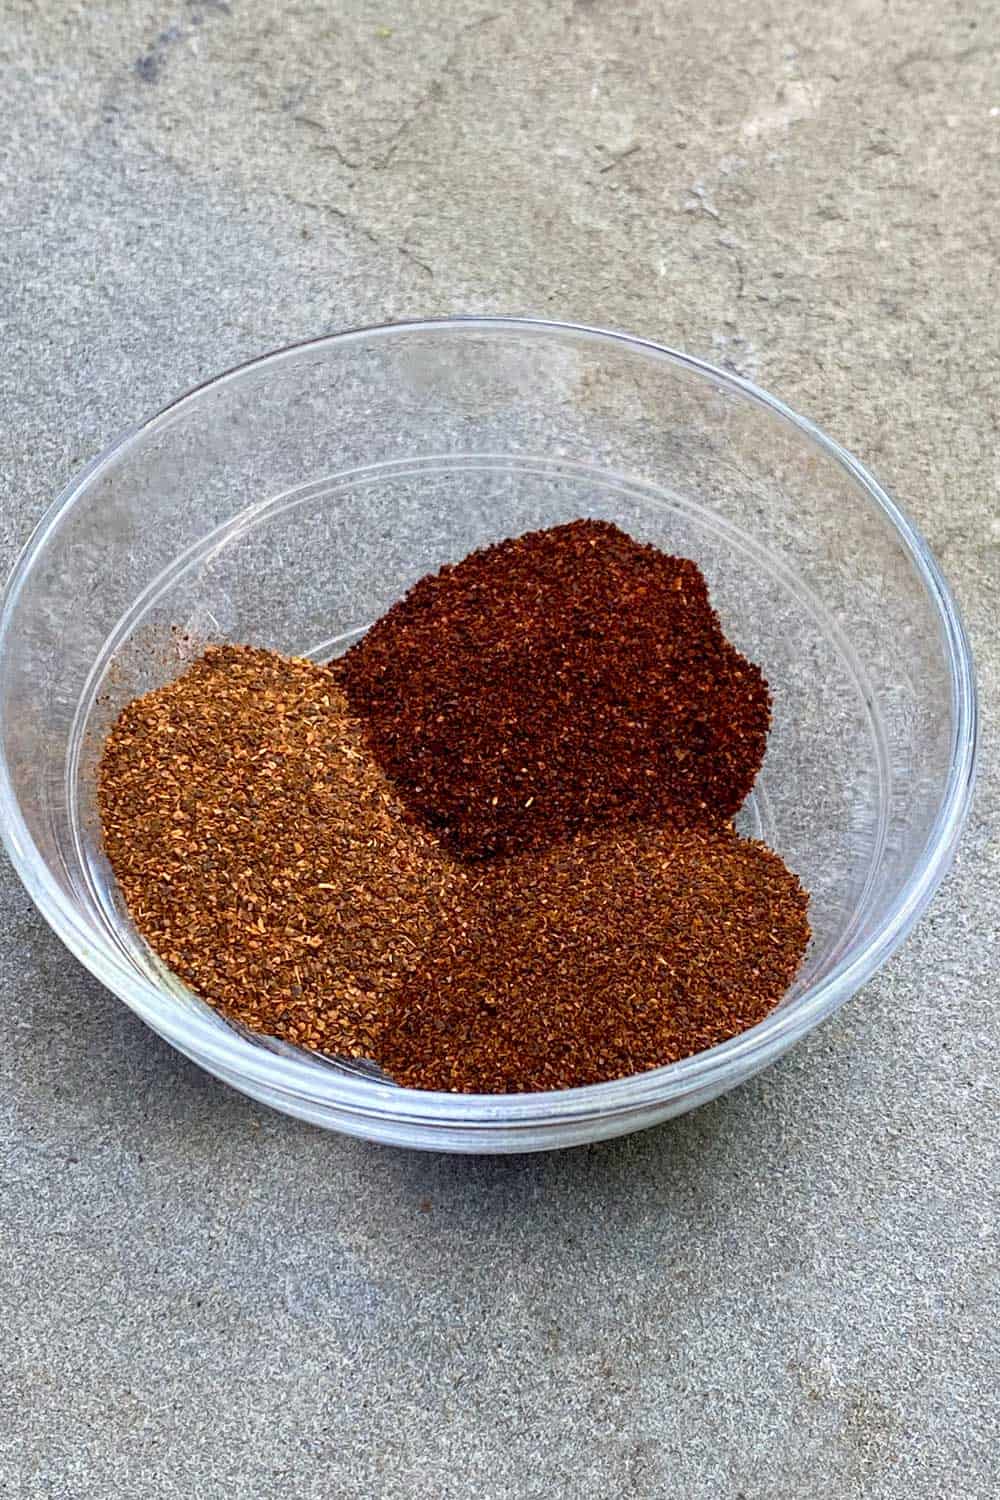 Three different chili powders, each a different shade of red, in a small glass bowl.